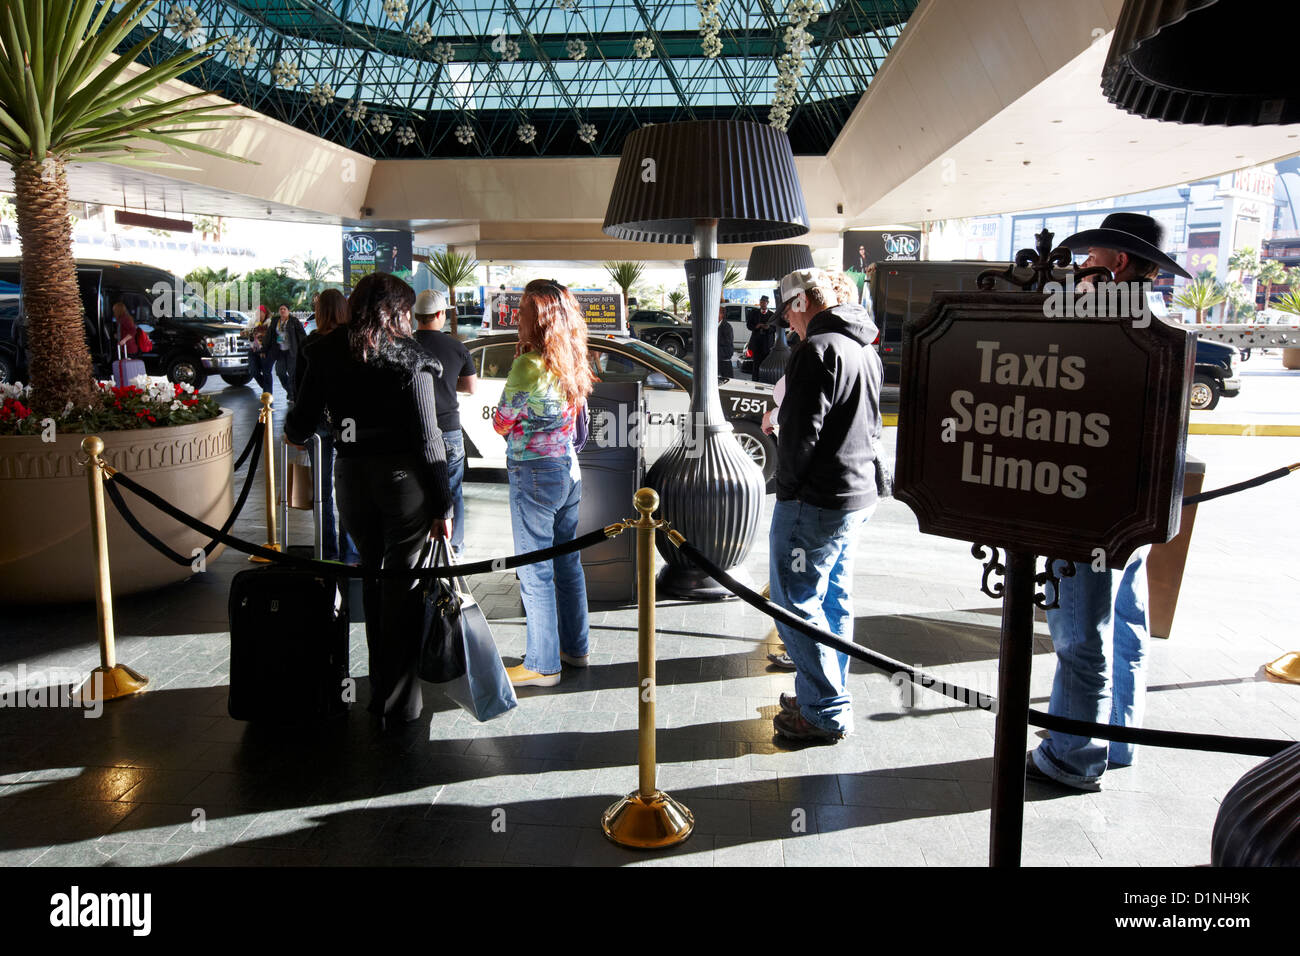 people queuing for taxis sedans and limos in valet area of hotel casino Las Vegas Nevada USA Stock Photo